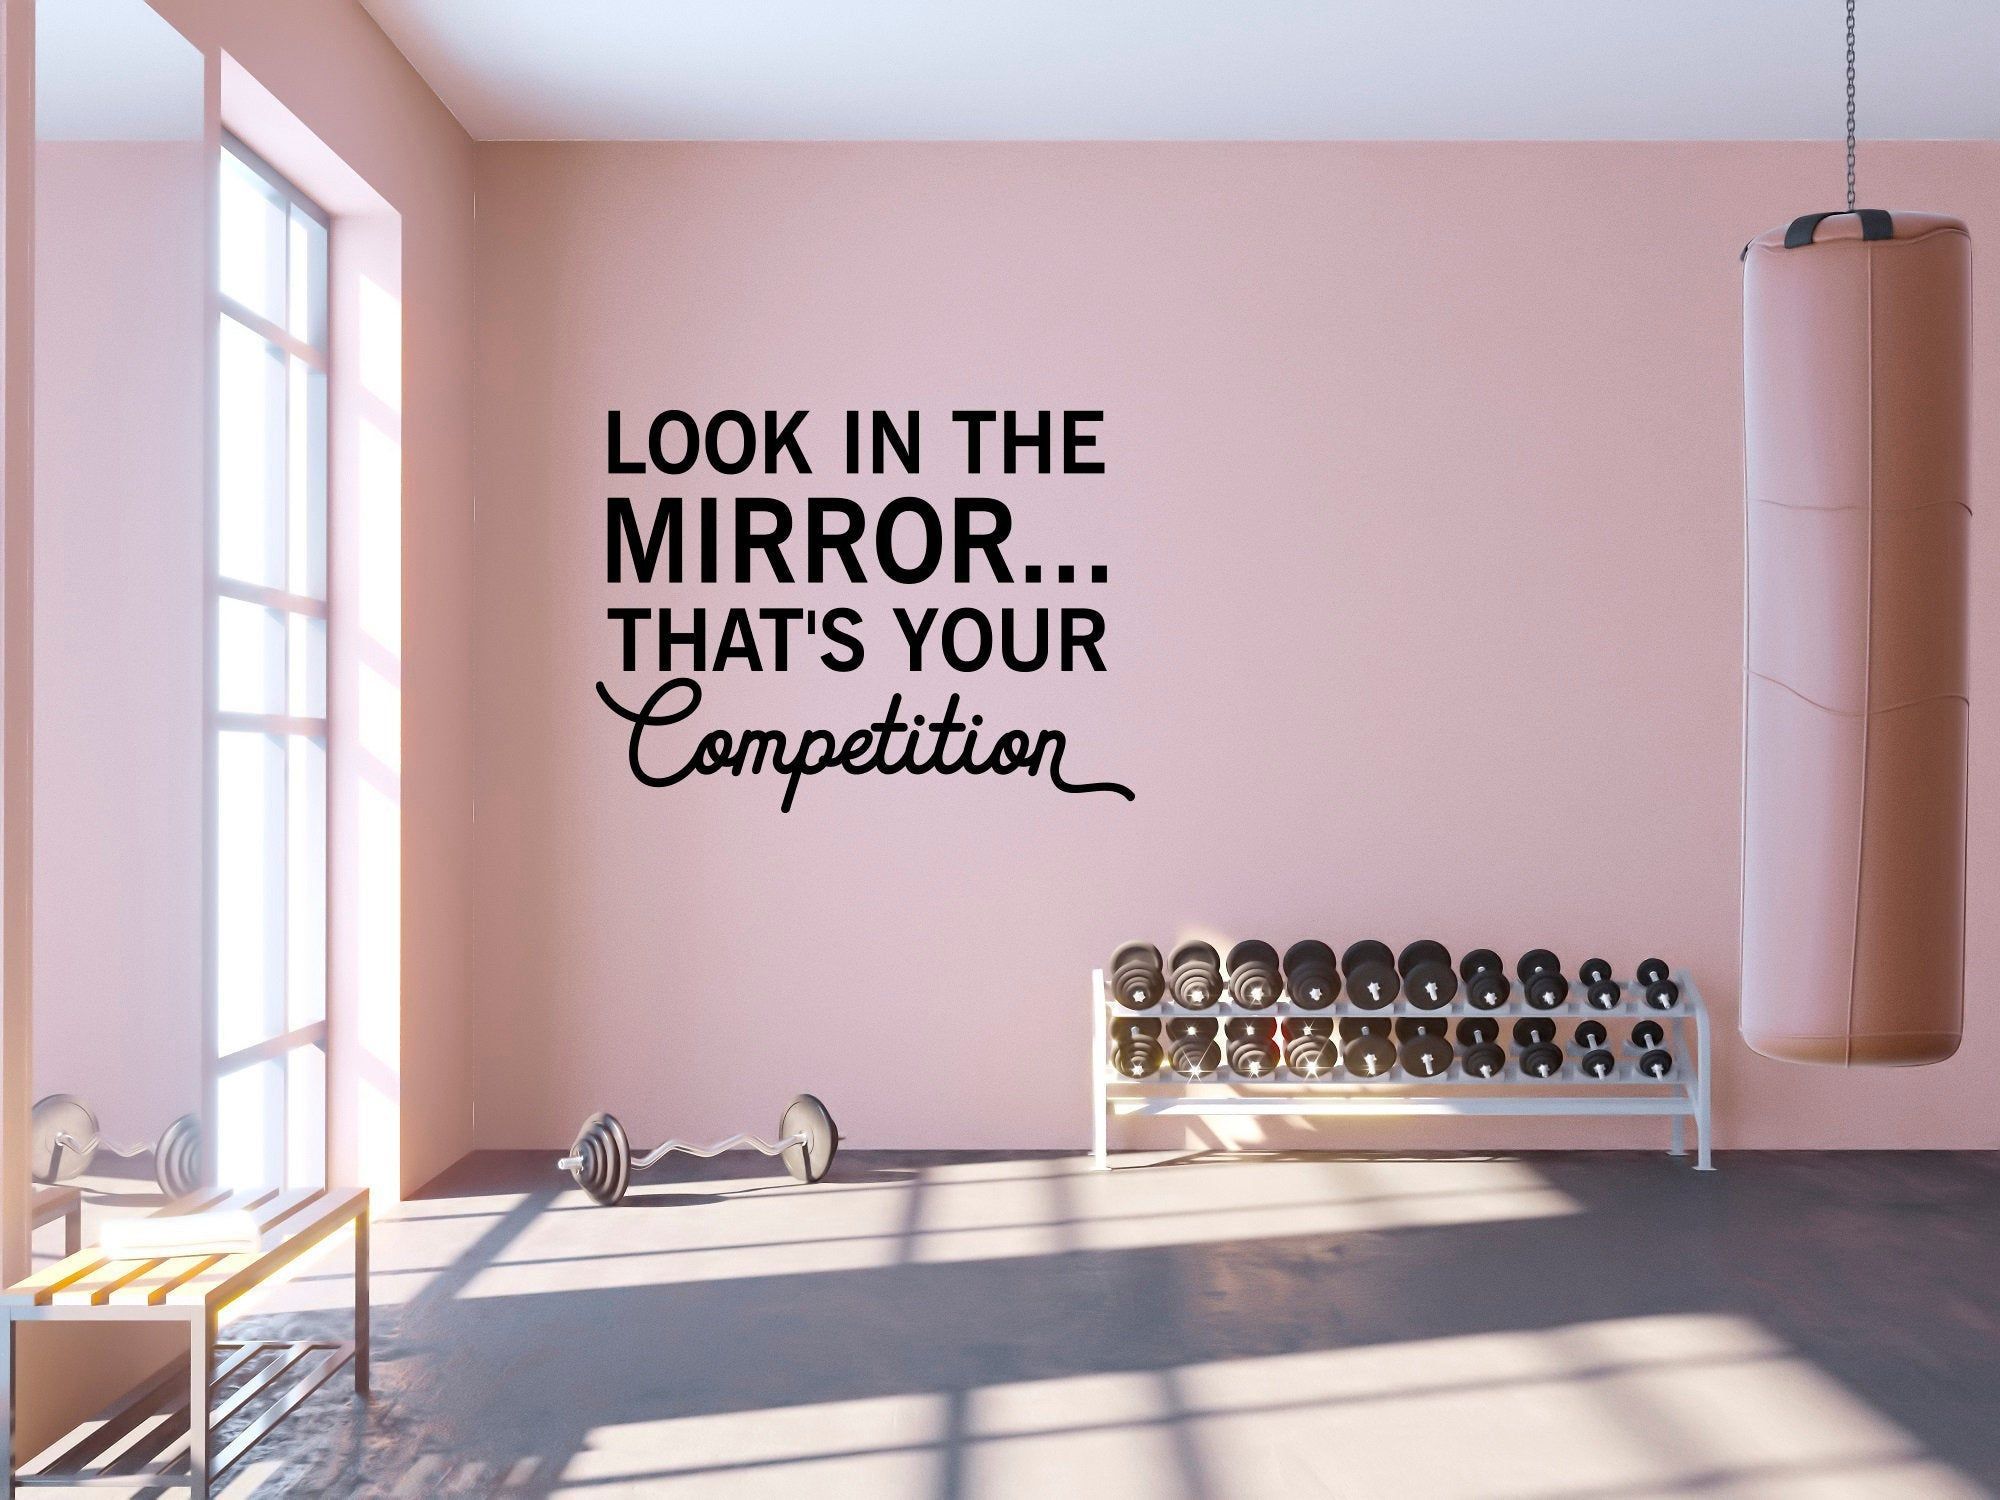 Look in the Mirror...That's Your Competition Quote Wall Decal - Sport Vinyl Stickers, Motivational Gym Decal, Fitness Quote Wall Decal SB155 - Look in the Mirror...That's Your Competition Quote Wall Decal - Sport Vinyl Stickers, Motivational Gym Decal, Fitness Quote Wall Decal SB155 -   16 fitness Room signs ideas